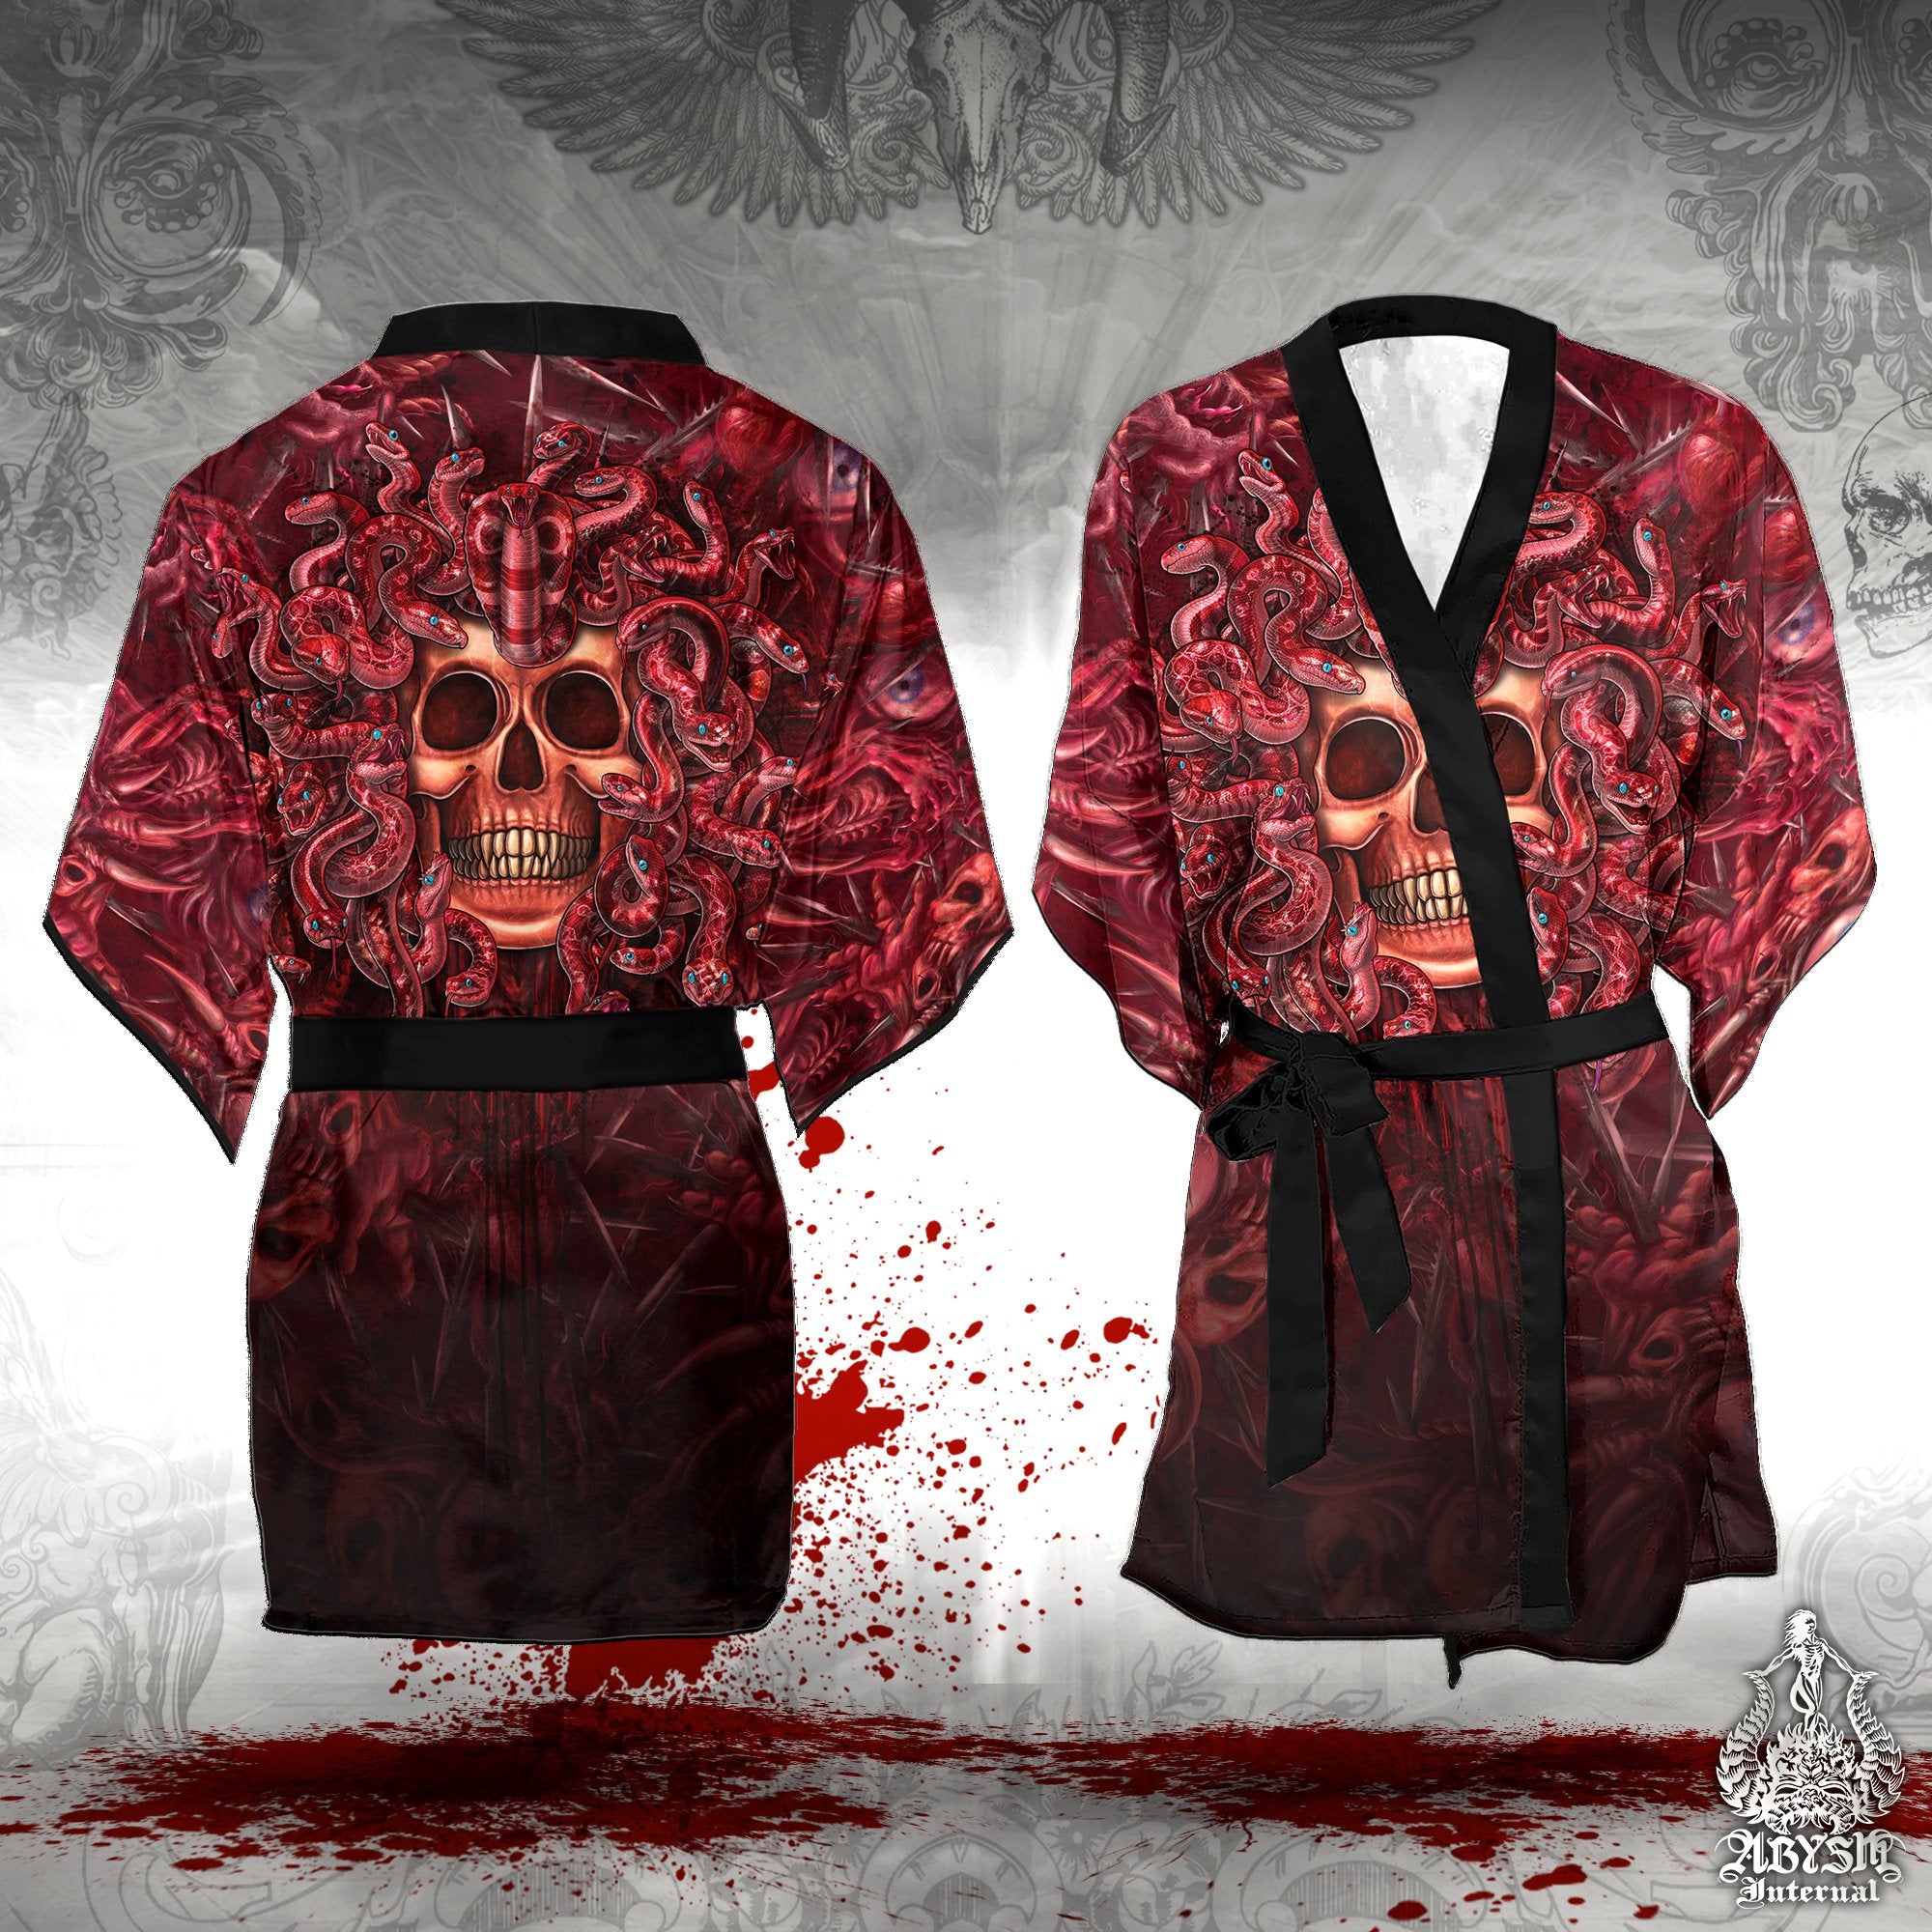 Halloween Skull Short Kimono Robe, Beach Party Outfit, Coverup, Horror Summer Festival, Alternative Clothing, Unisex - Gore and Blood, 2 Faces - Abysm Internal